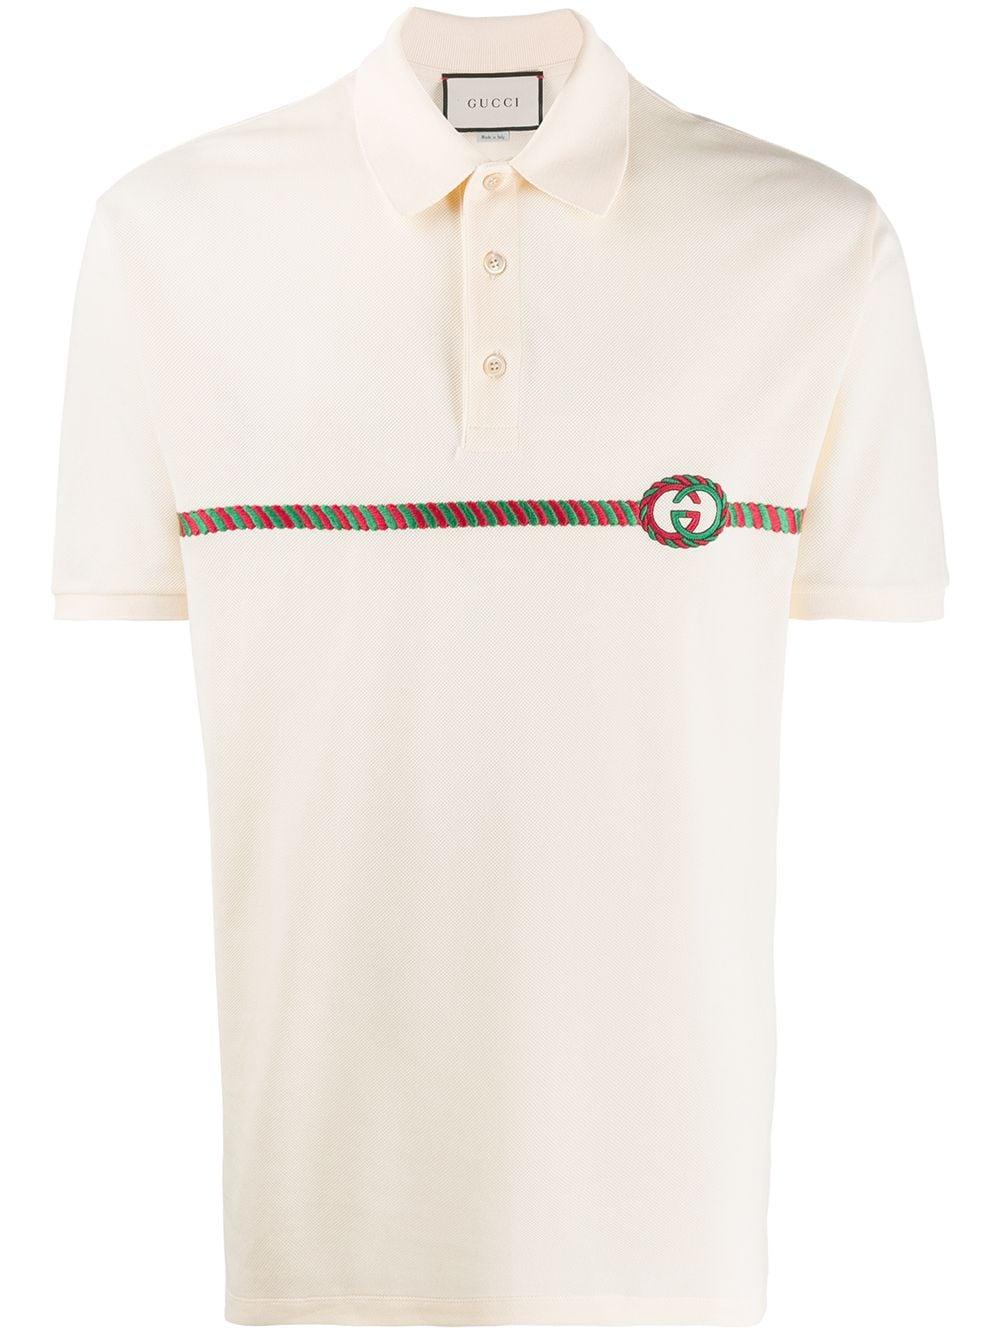 Gucci Synthetic GG Embroidered Polo Shirt in White for Men - Lyst